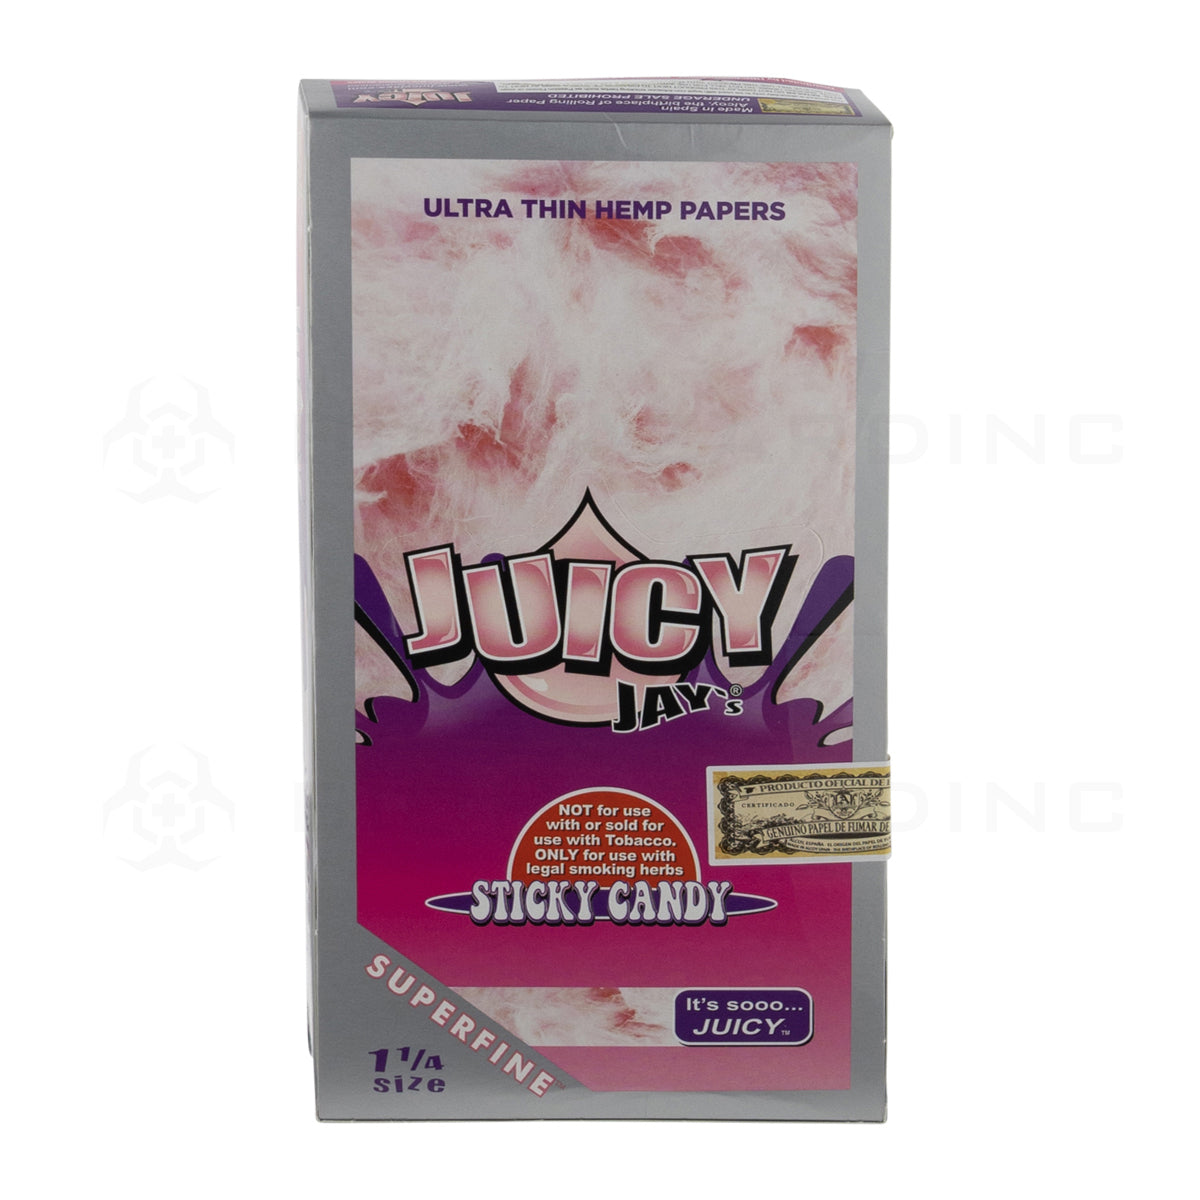 Juicy Jay's® | Wholesale Superfine™ Ultra Thin Hemp Papers Classic 1¼ Size | 78mm - 24 Count - Various Flavors Rolling Papers Juicy Jay's Stick Candy  